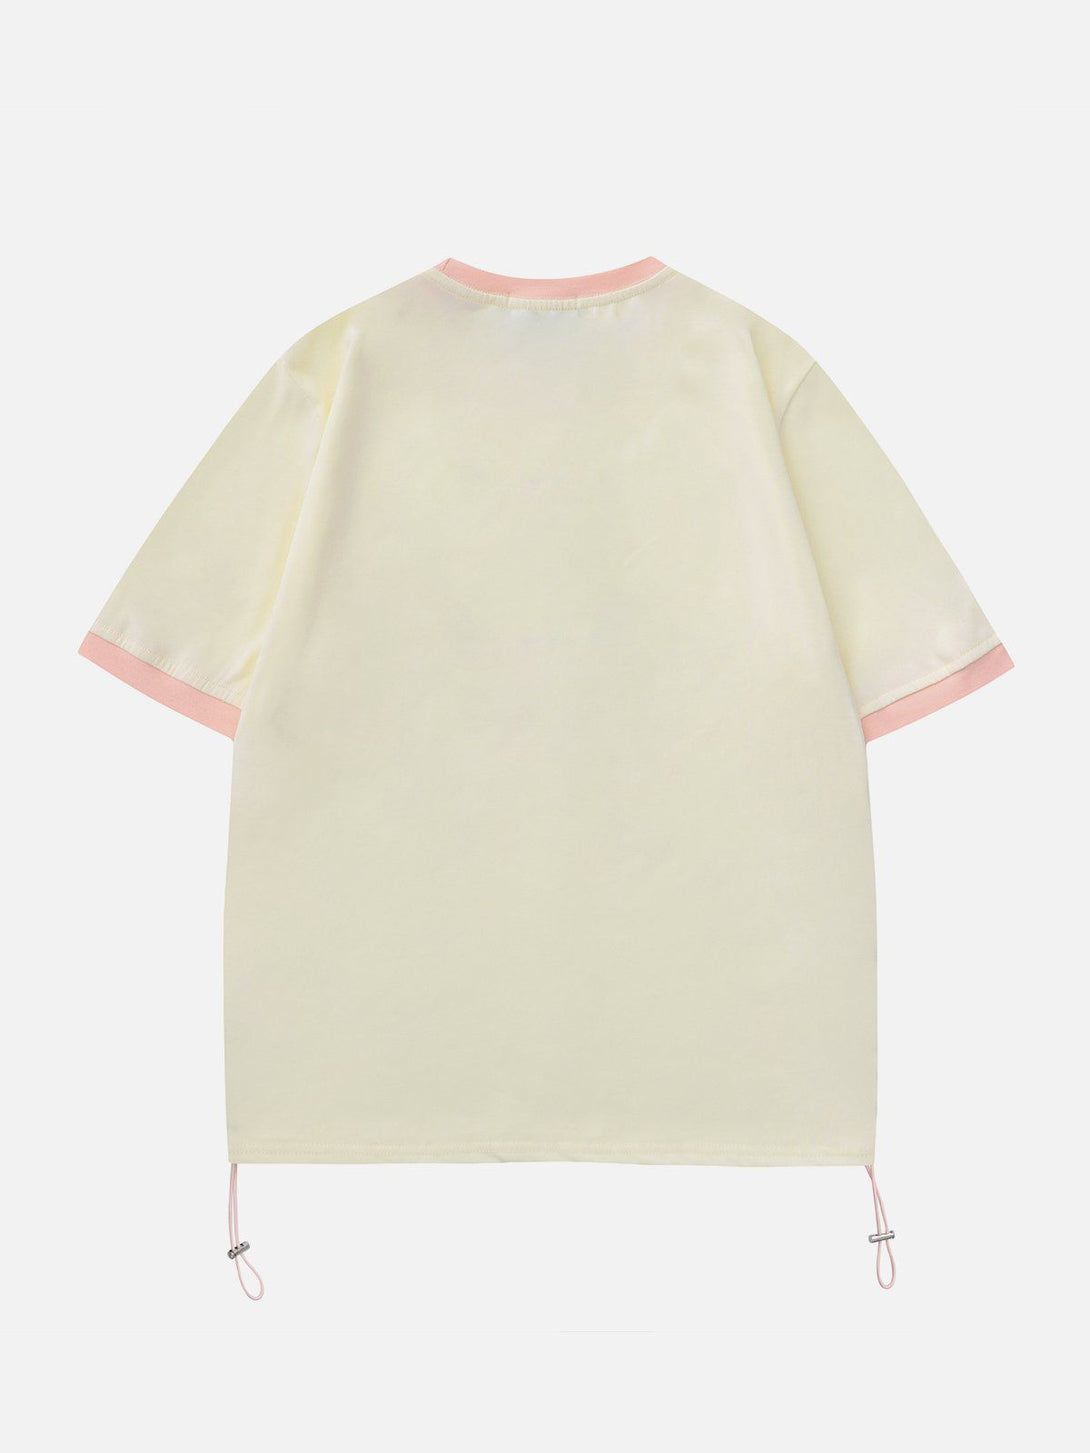 Ellesey - Star Embroidery Side Drawstring Tee- Streetwear Fashion - ellesey.com